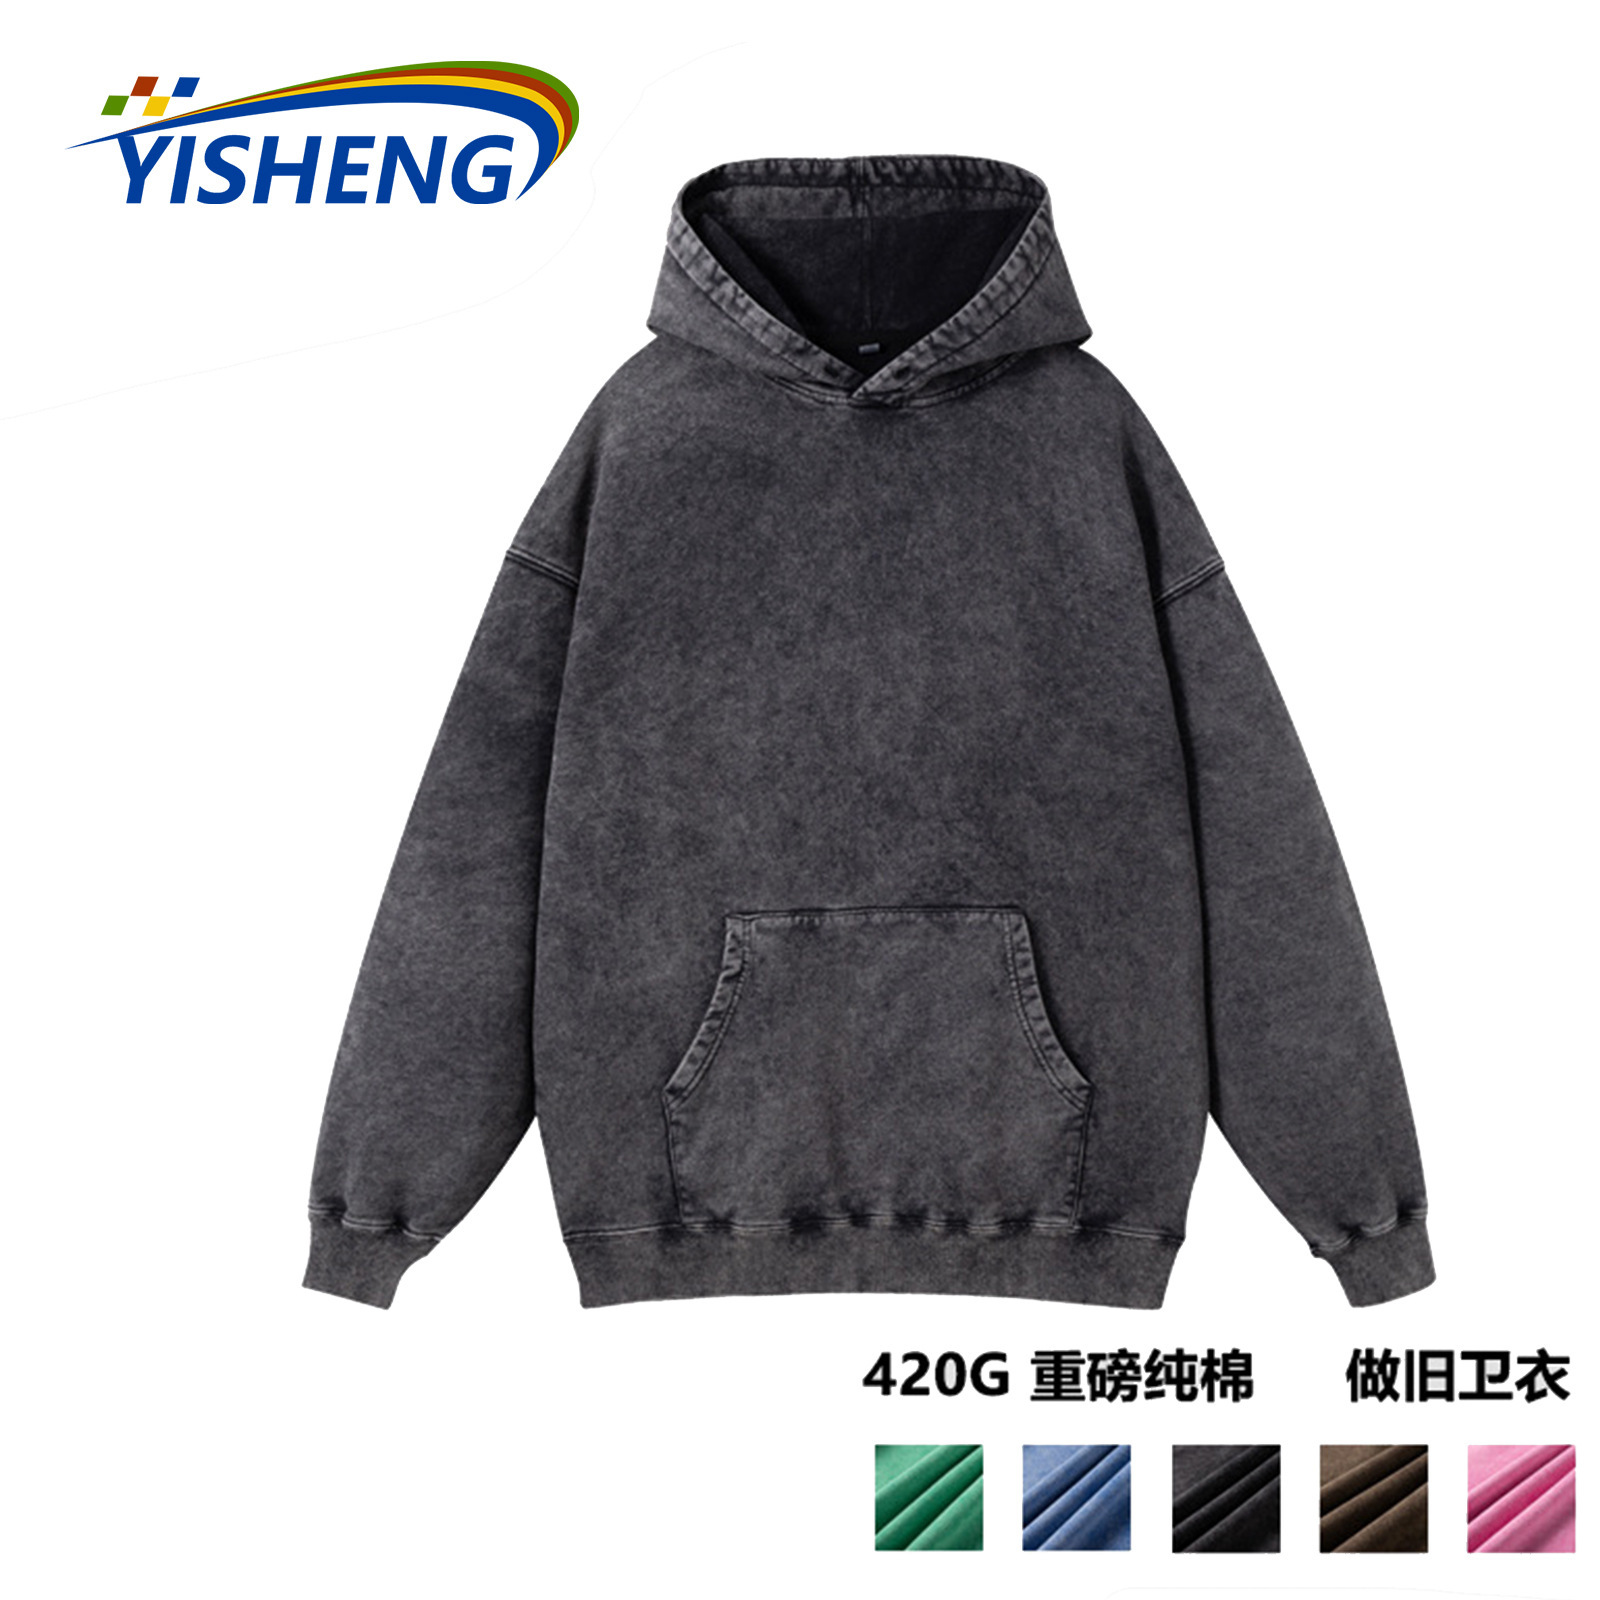 420G Europe and America Cross border Heavy washing Do the old Sweater Chaopai leisure time Retro Stone mill Snowflake jacket